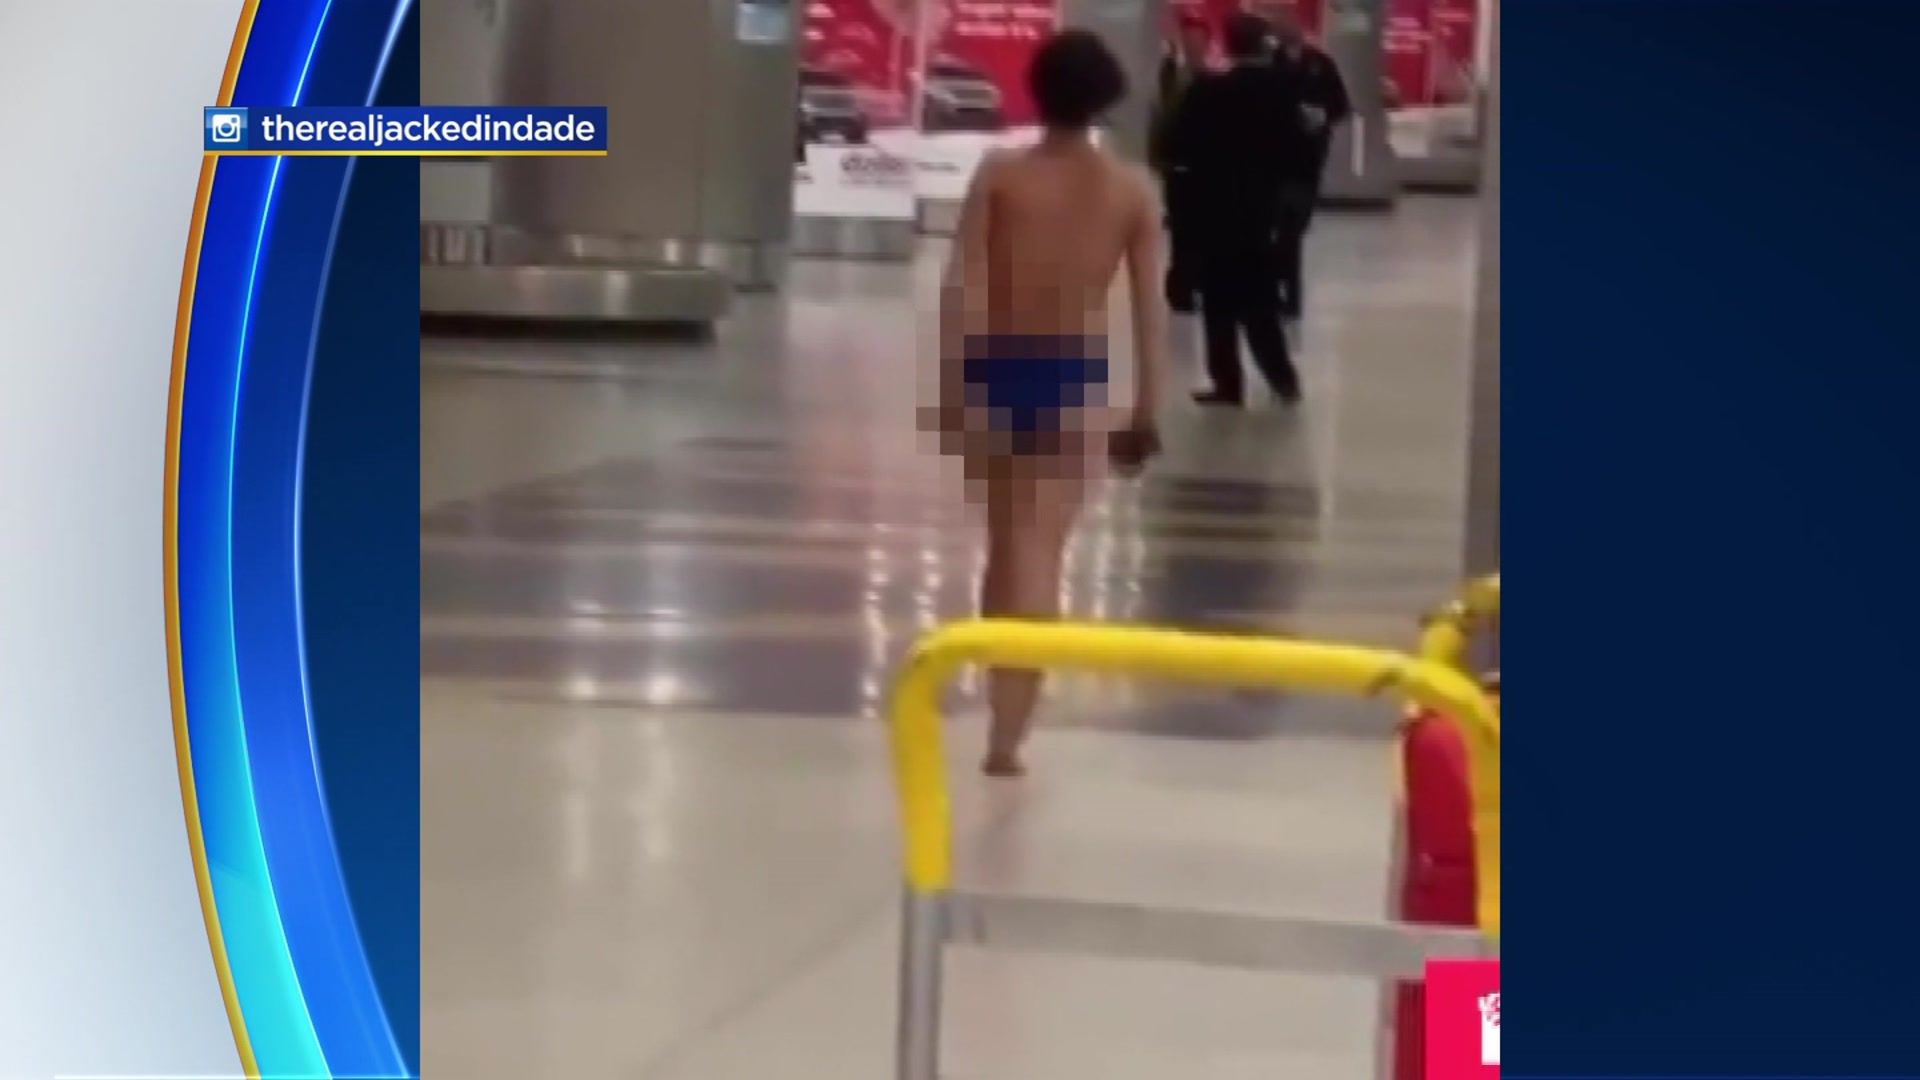 Video shows woman strip off clothes, walk around naked at 